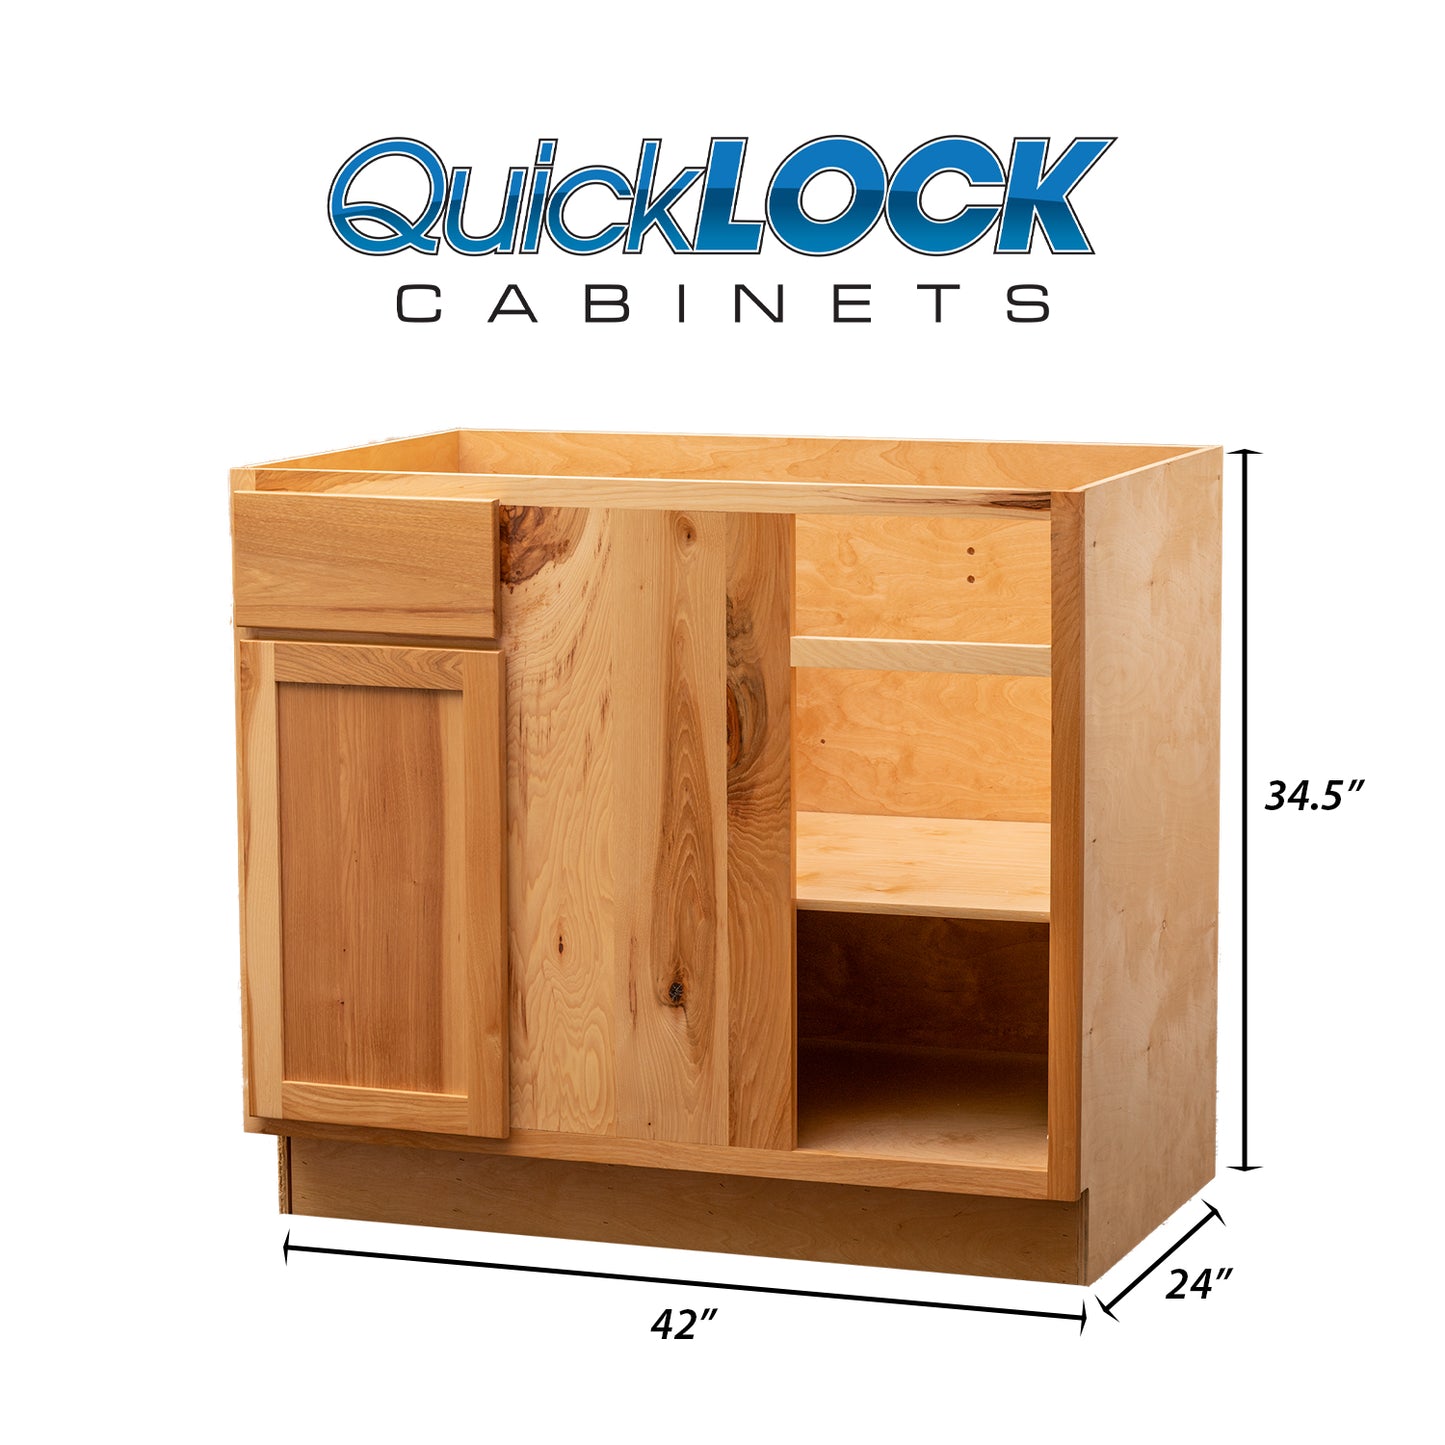 Quicklock RTA (Ready-to-Assemble) Rustic Hickory 42" Blind Base Cabinet | 42"Wx34.5"Hx24"D